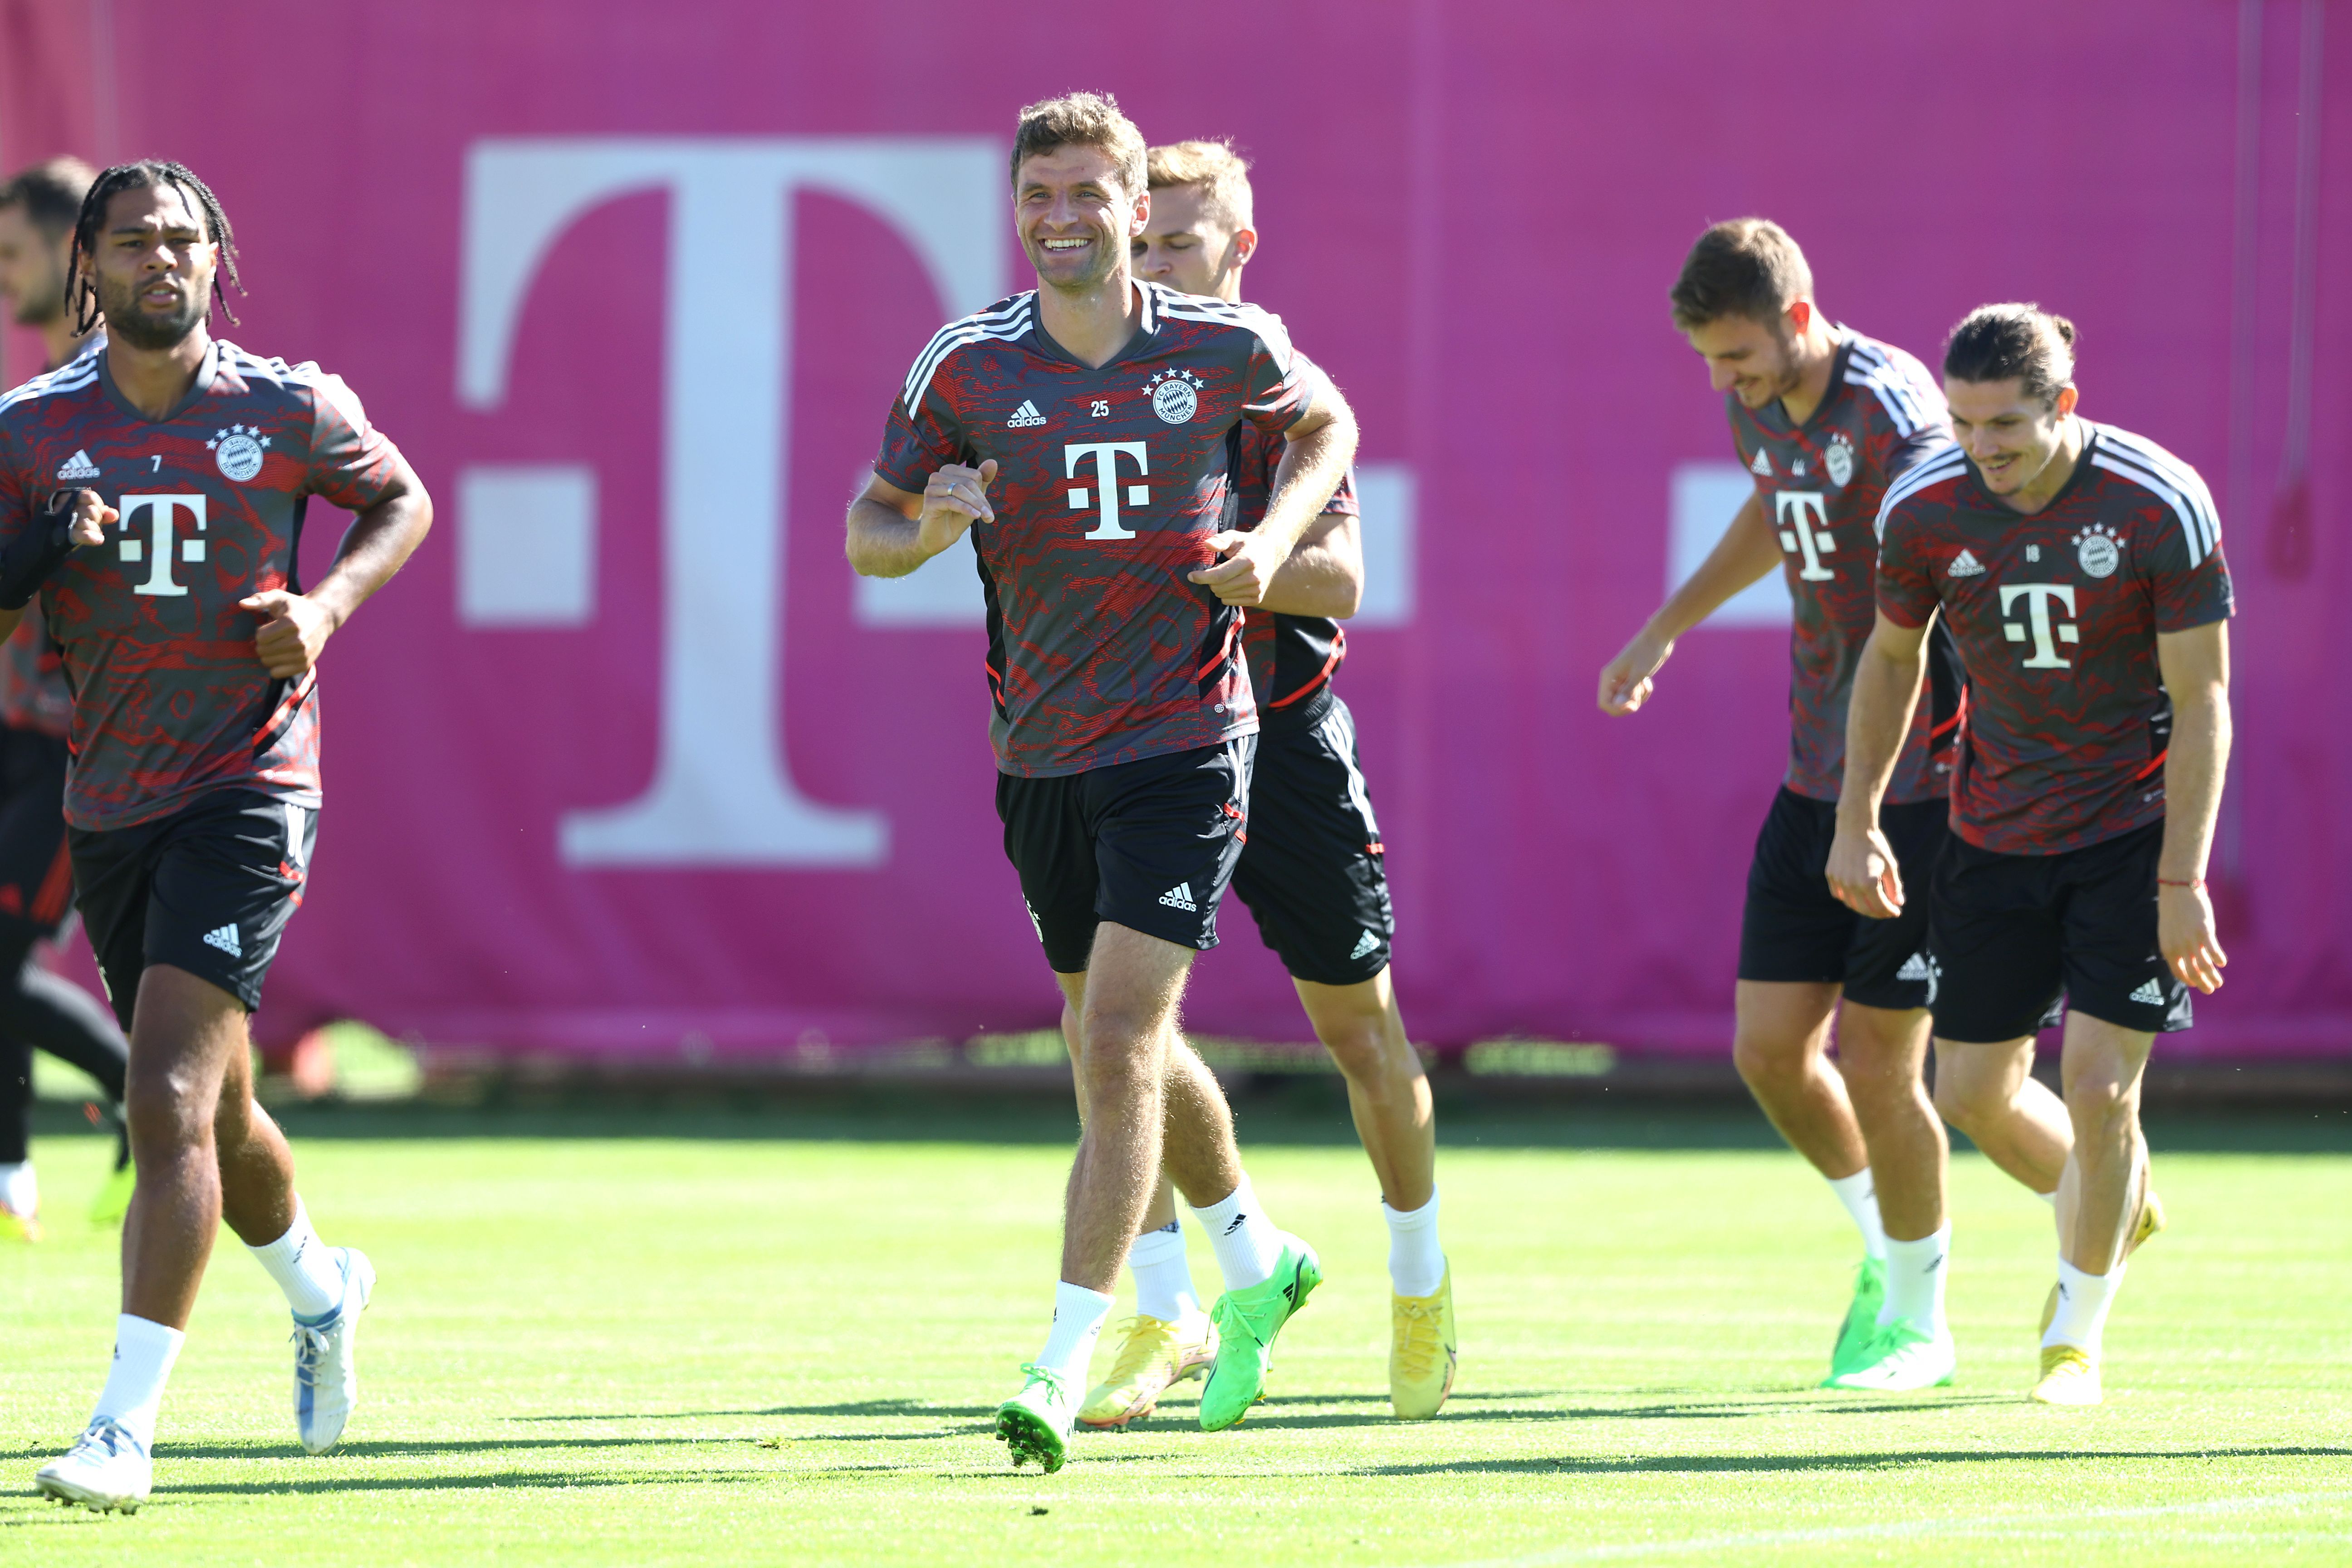 FC Bayern München Training Session And Press Conference